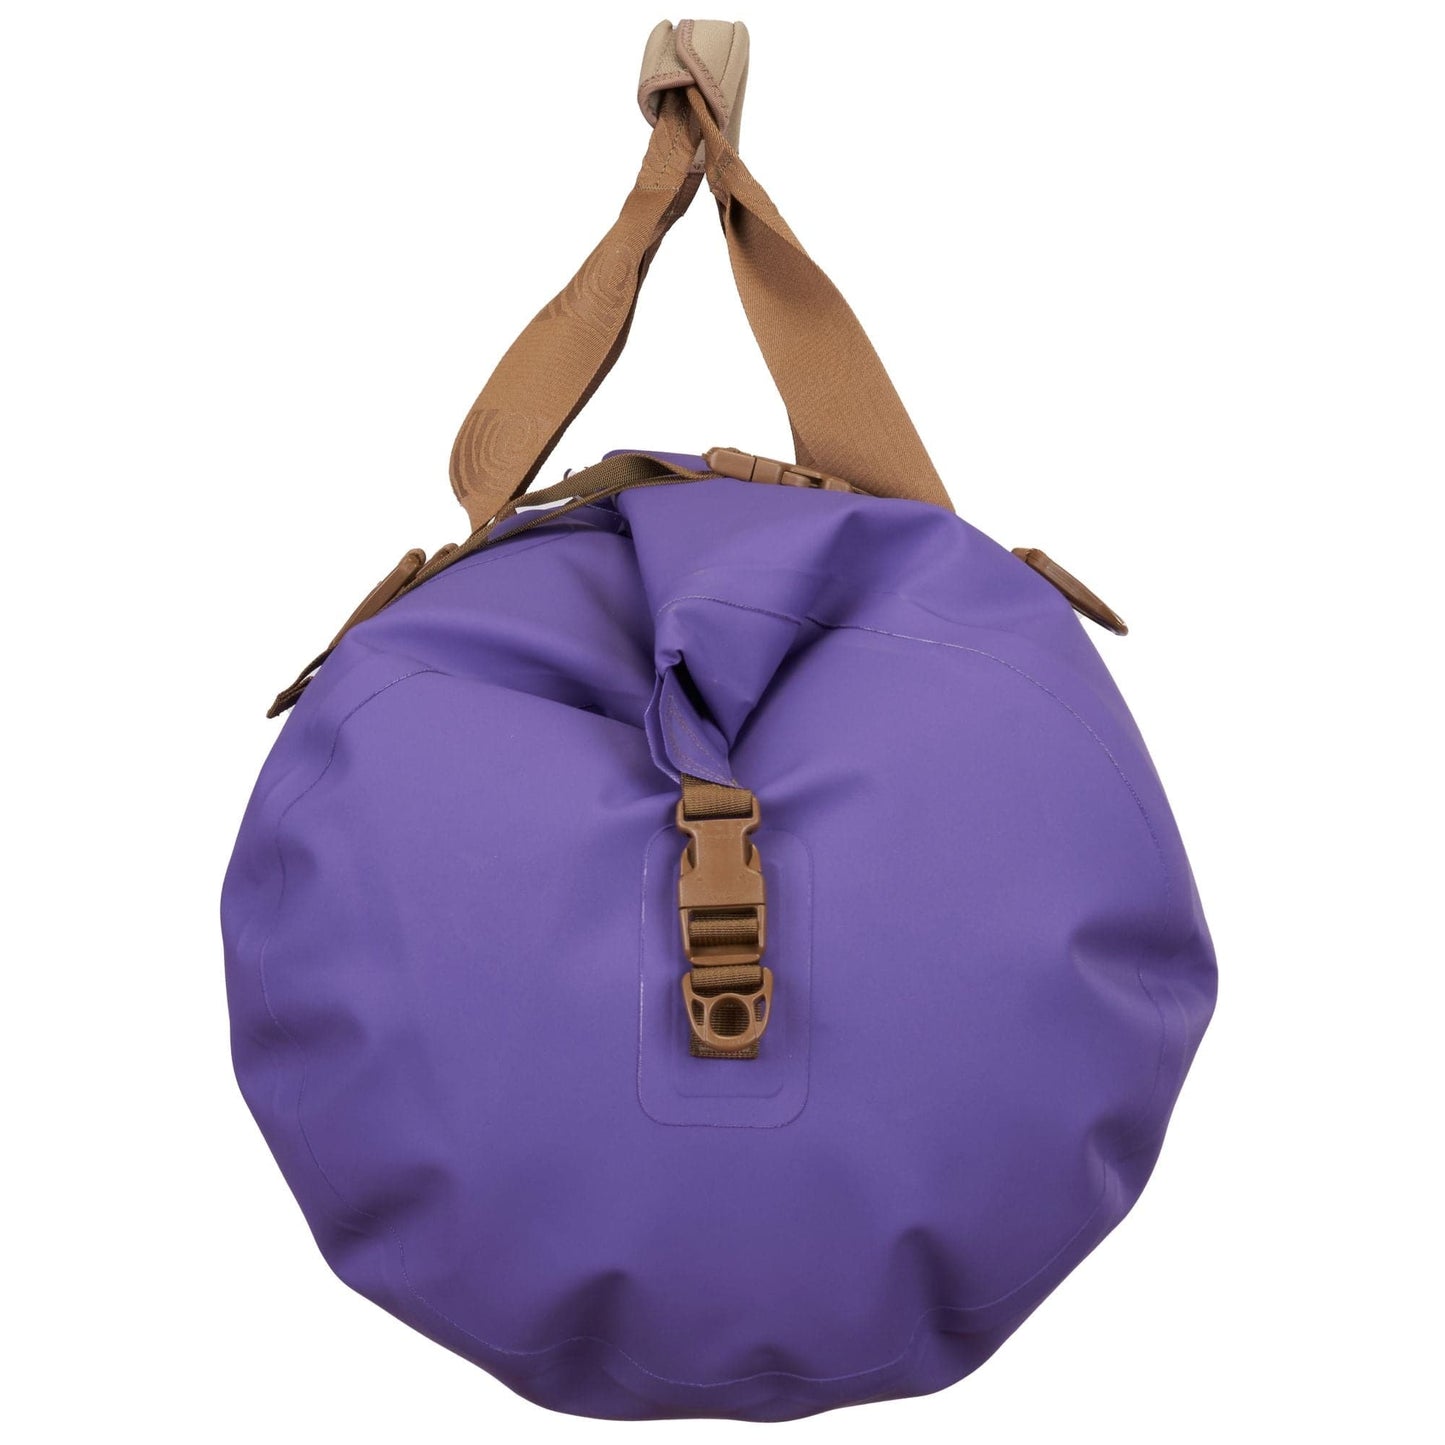 Featuring the Colorado Duffel dry bag manufactured by Watershed shown here from a third angle.